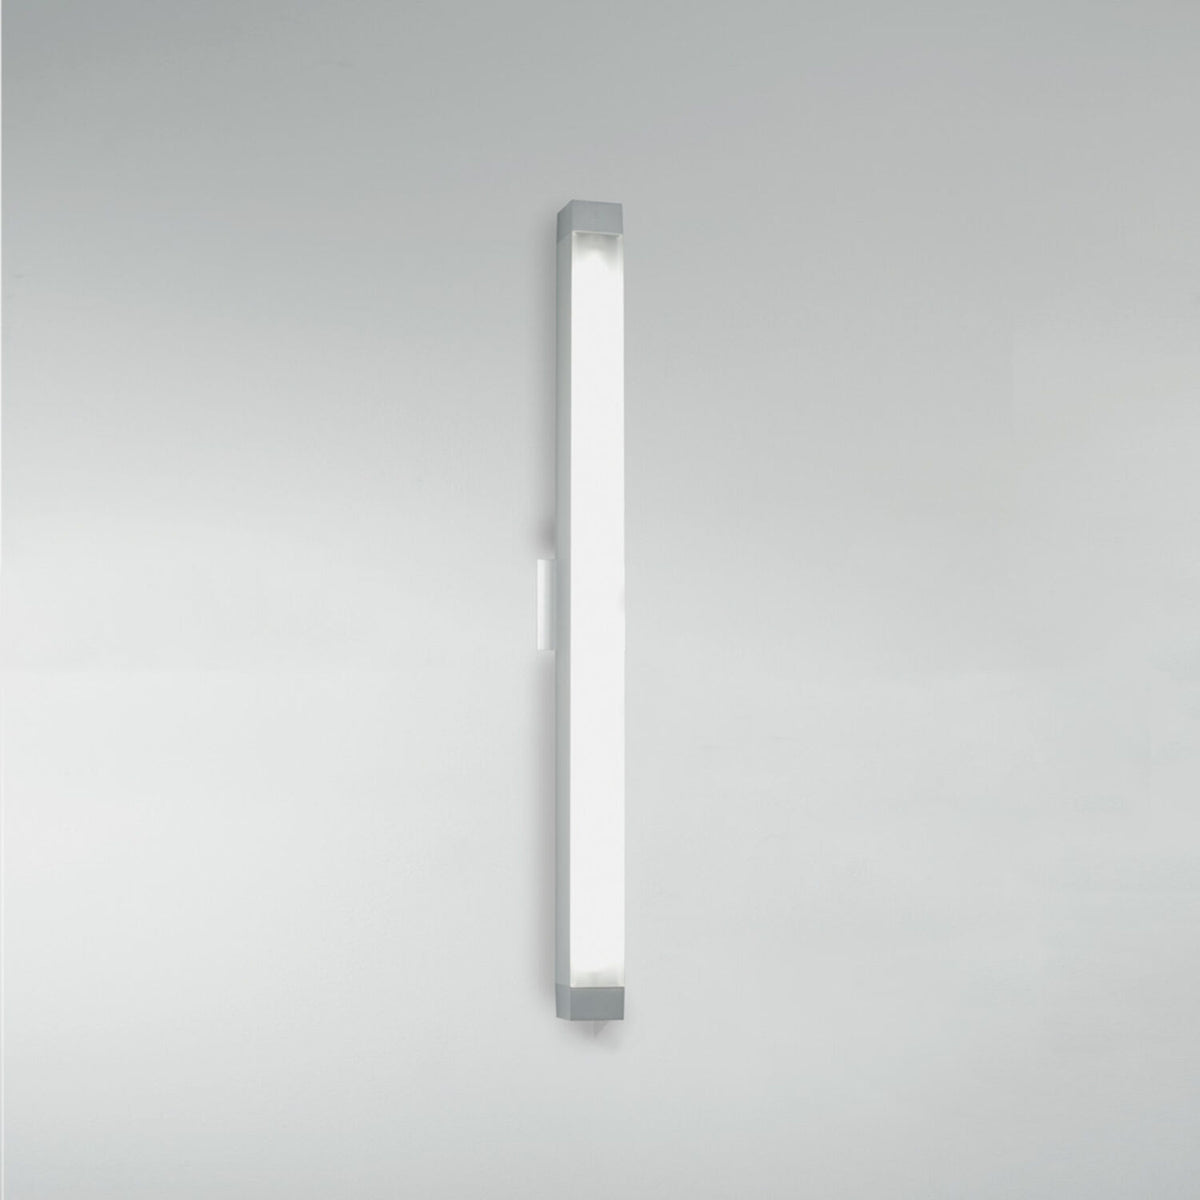 2.5 SQUARE STRIP 37-INCH LED WALL/CEILING LIGHT